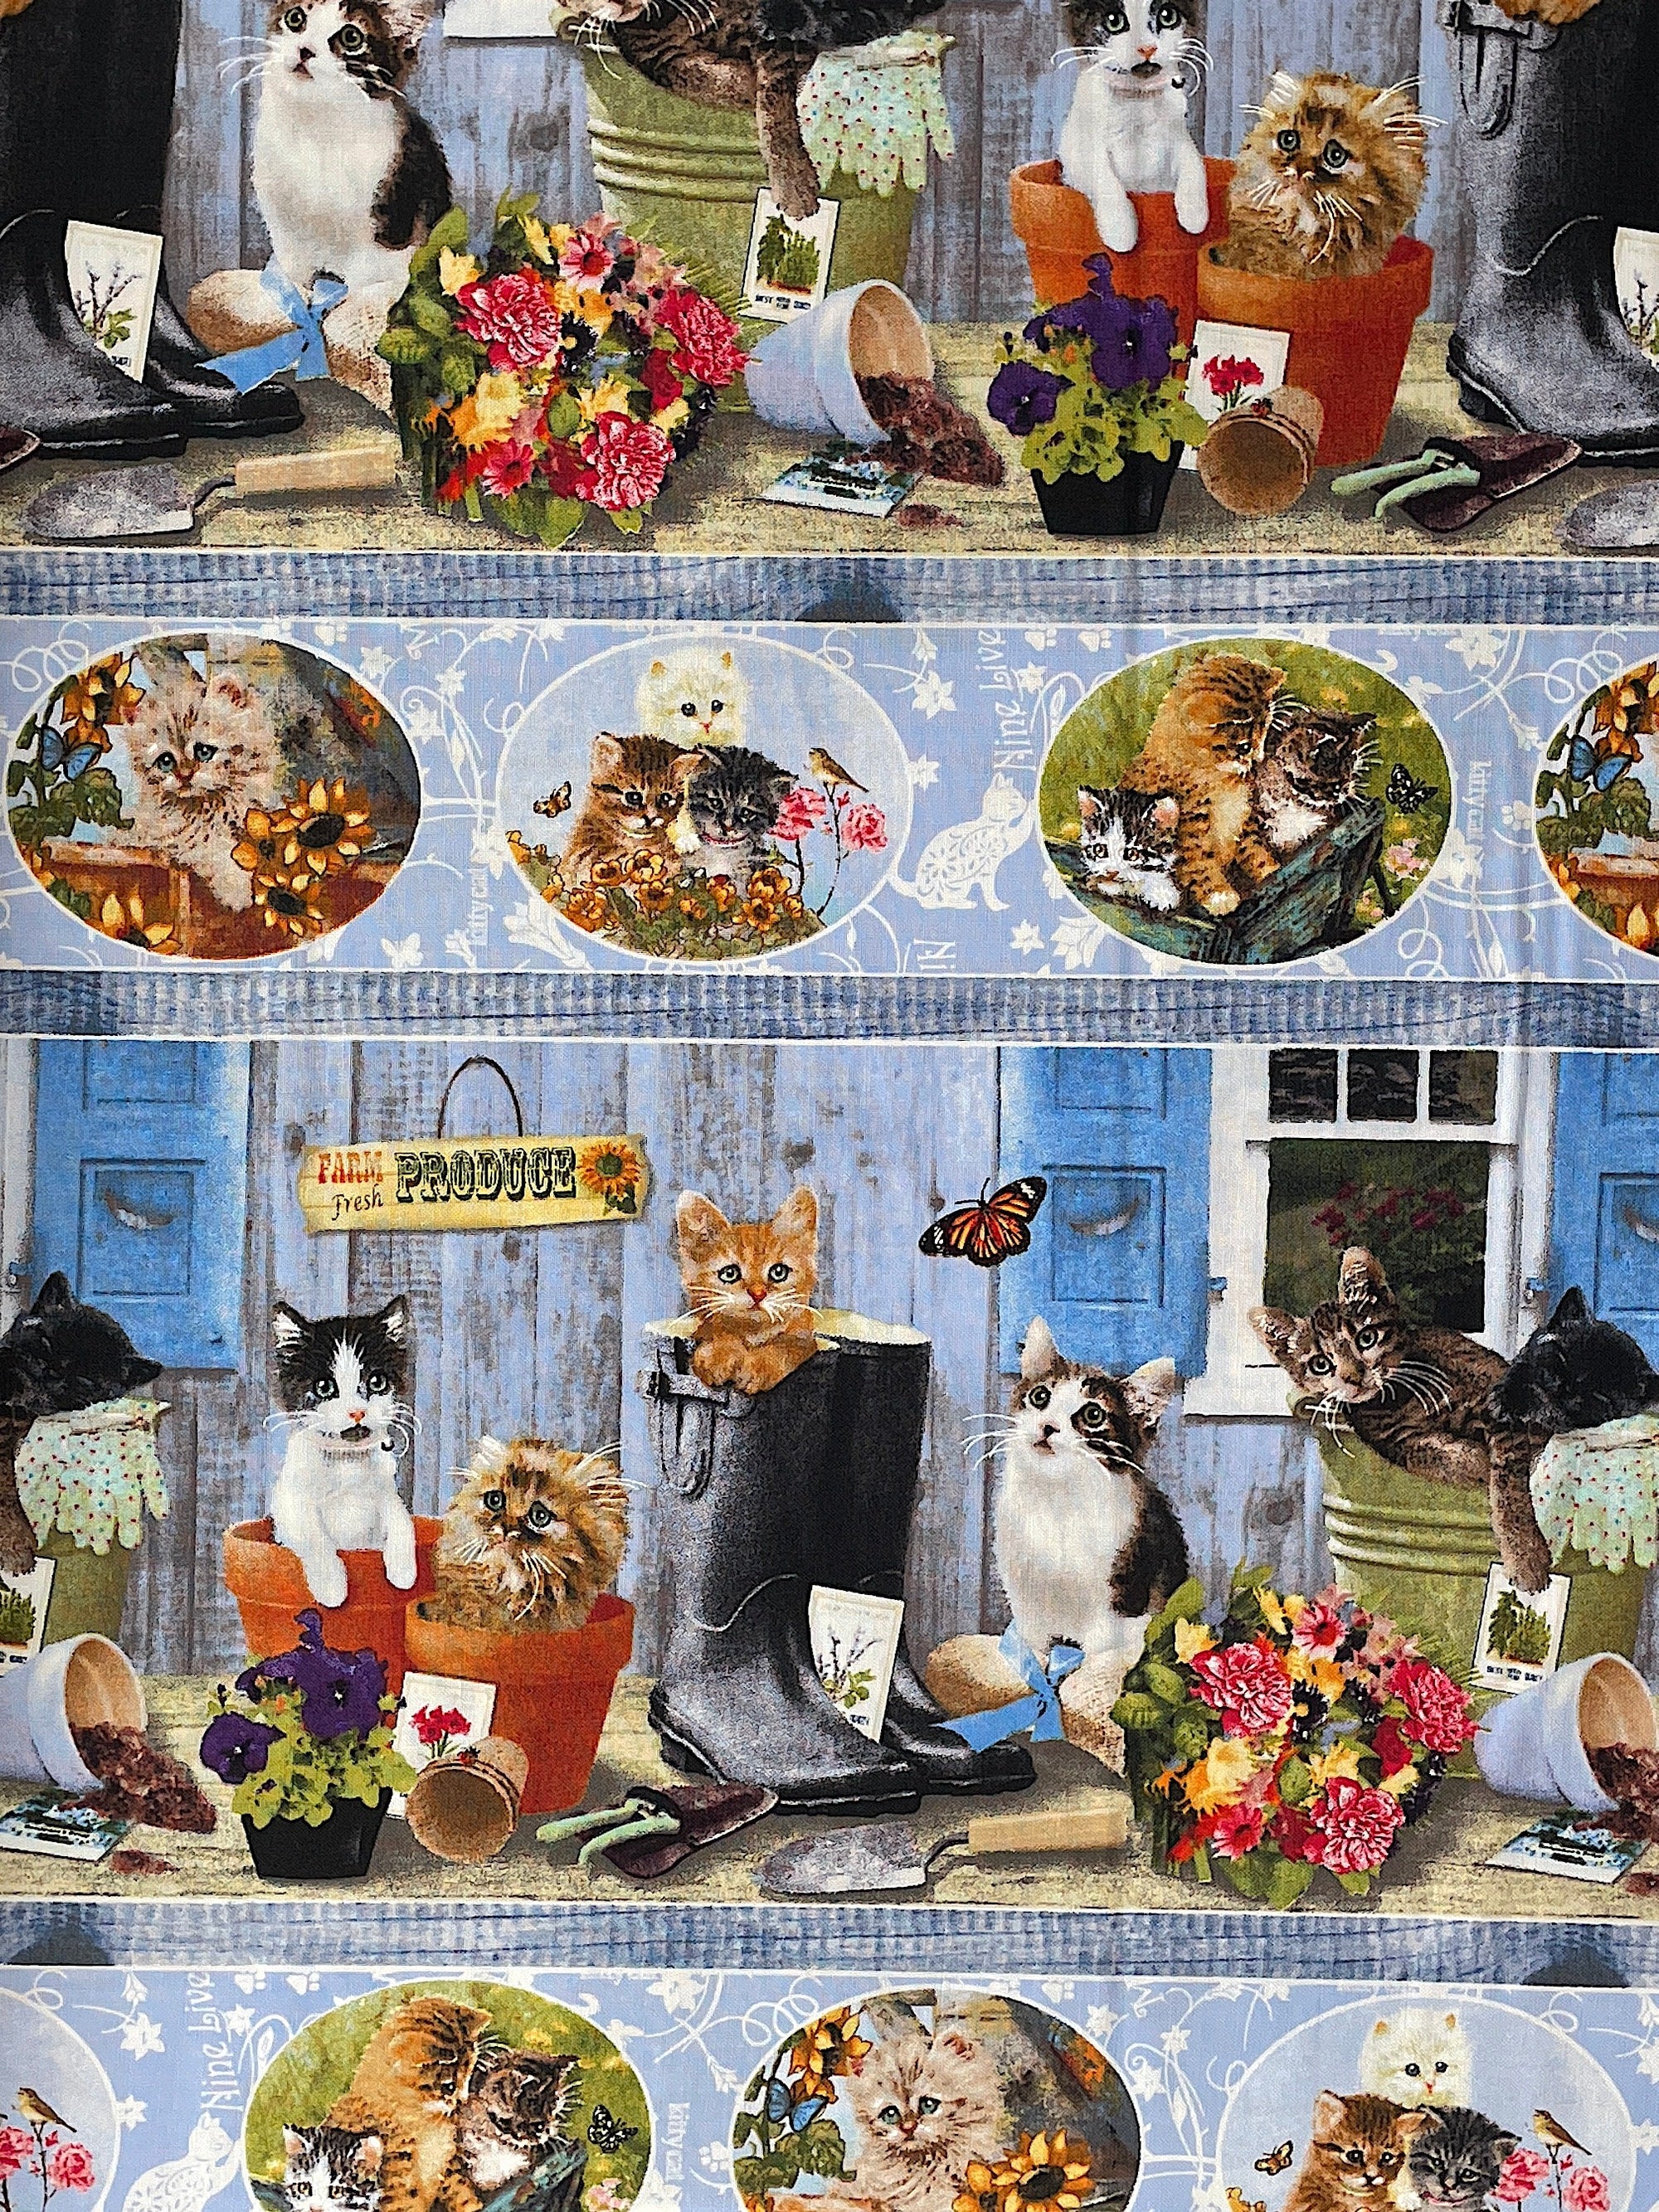 This border stripe fabric is covered with kittens. Some of the kittens are in pots while others are in boots. There are also pots of flowers, garden tools and seed packets.